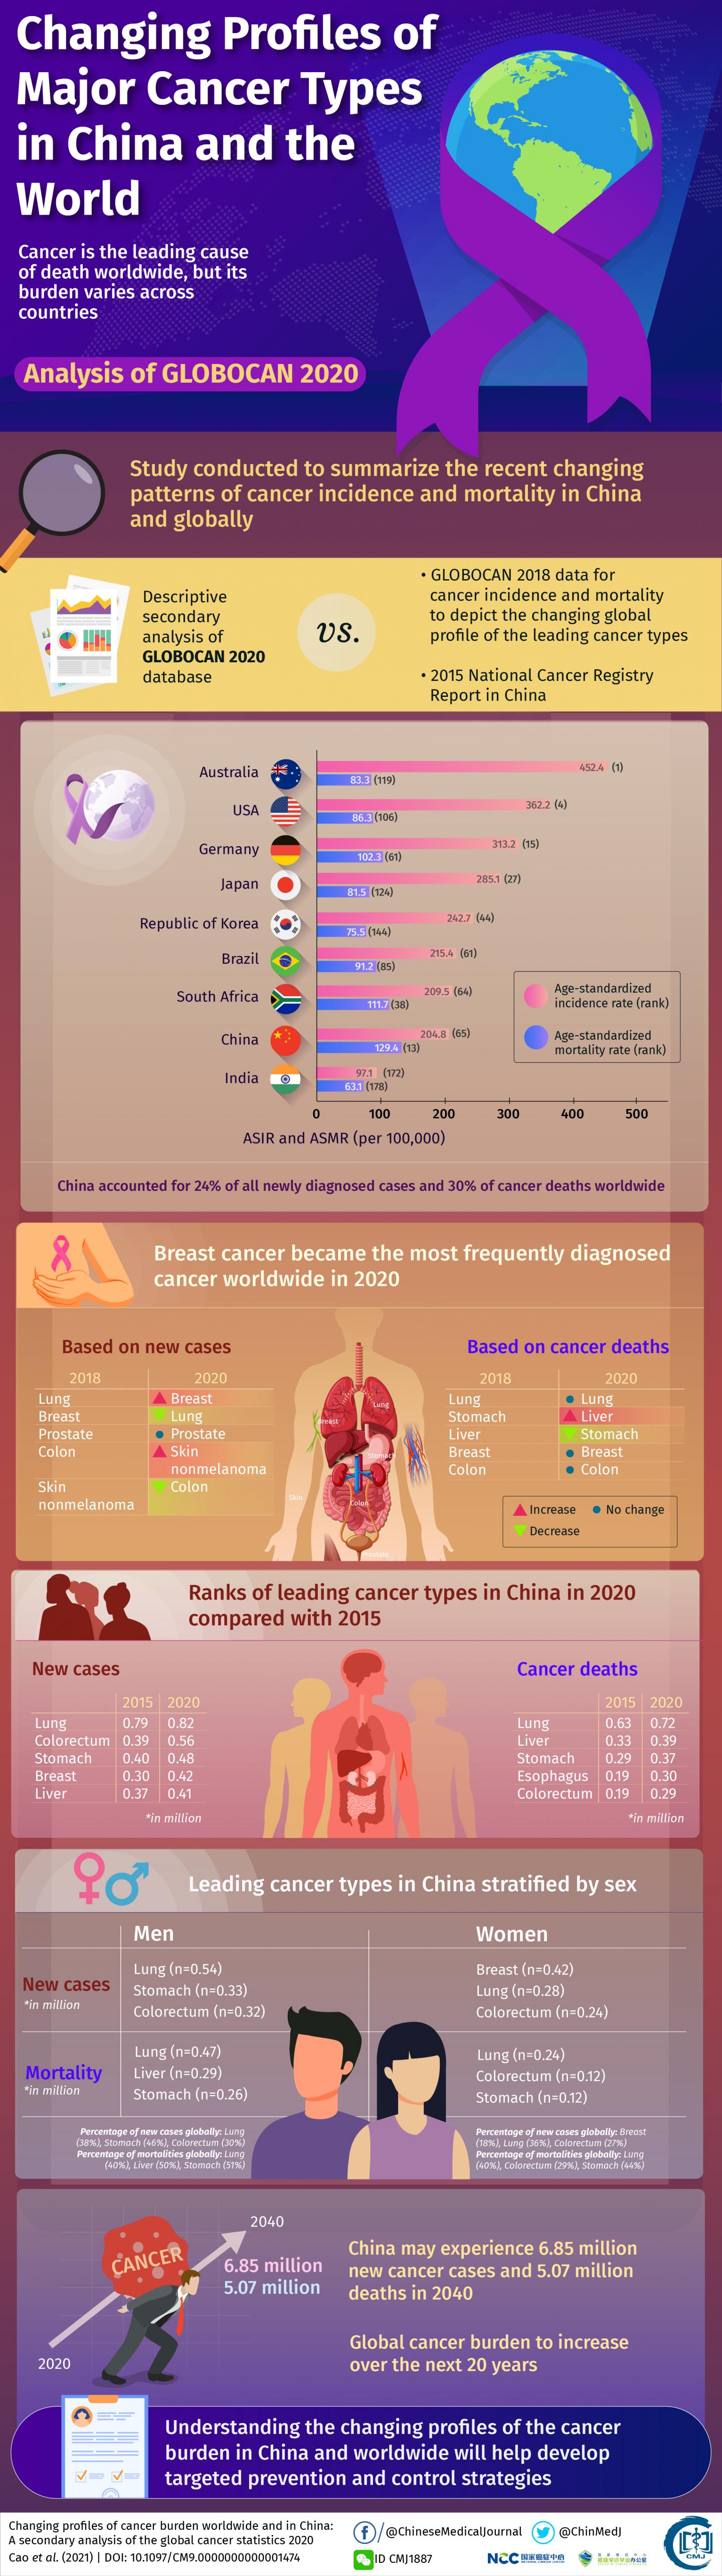 Mapping the Paradigm Shift of China's Cancer Burden for Designing Prevention Strategies